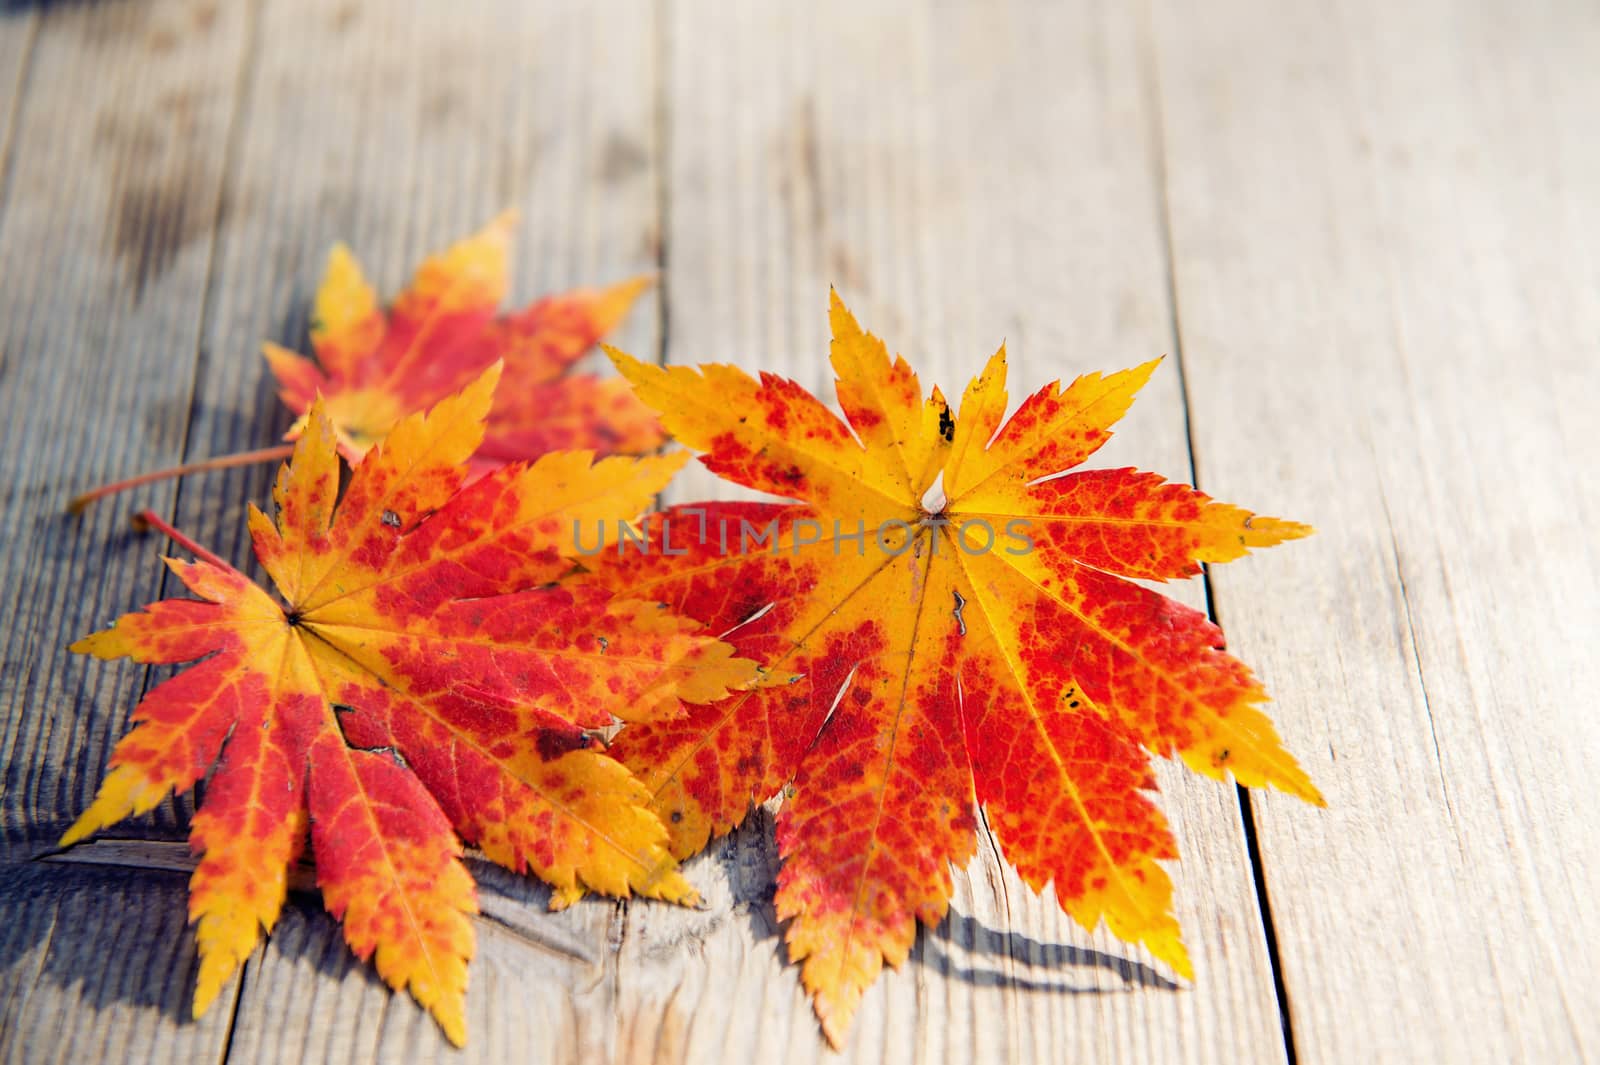 Autumn maple leaves on wooden background.